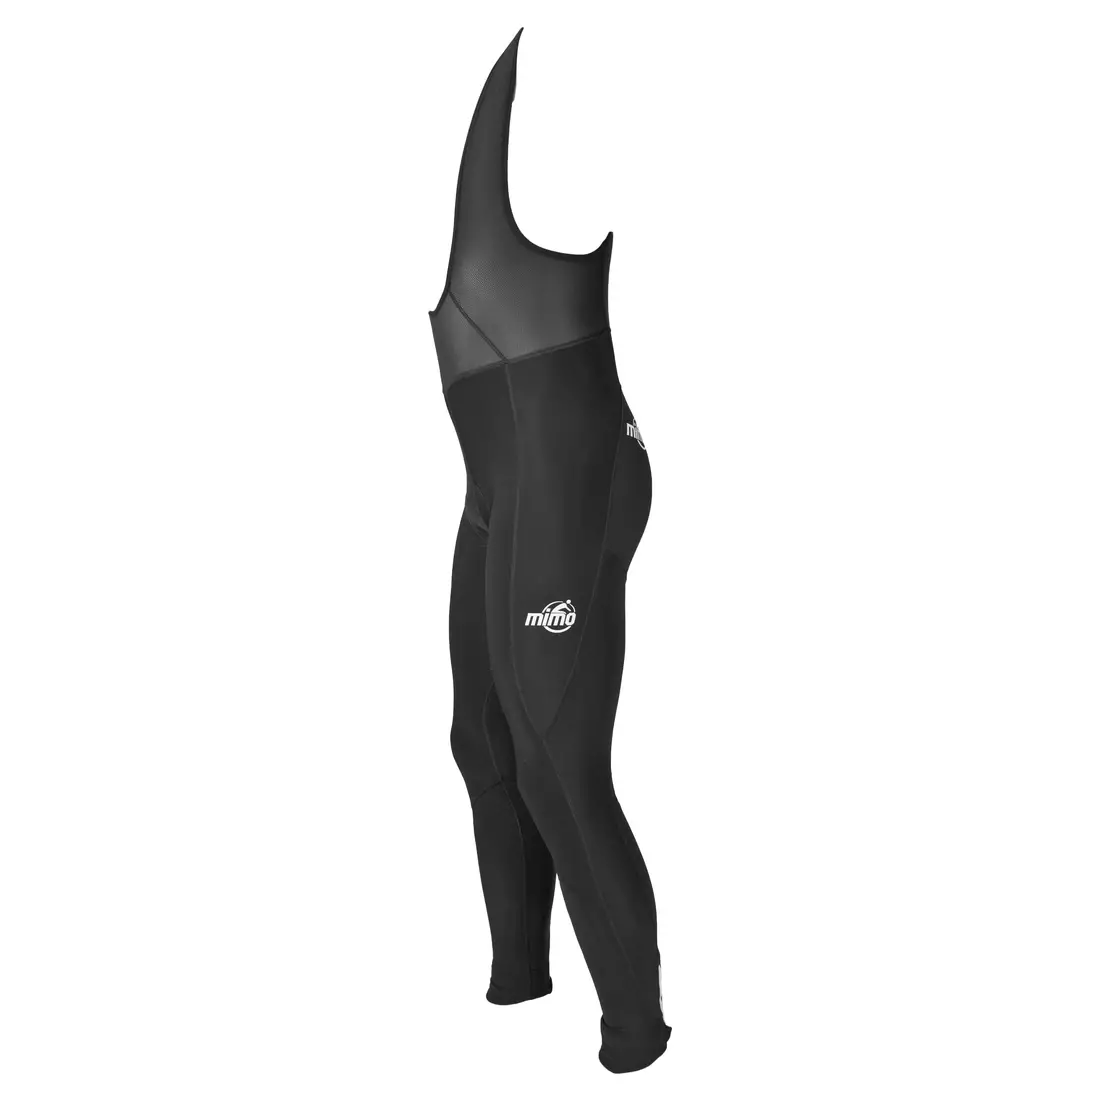 MikeSPORT CHAOS Superroubaix cycling pants with insert